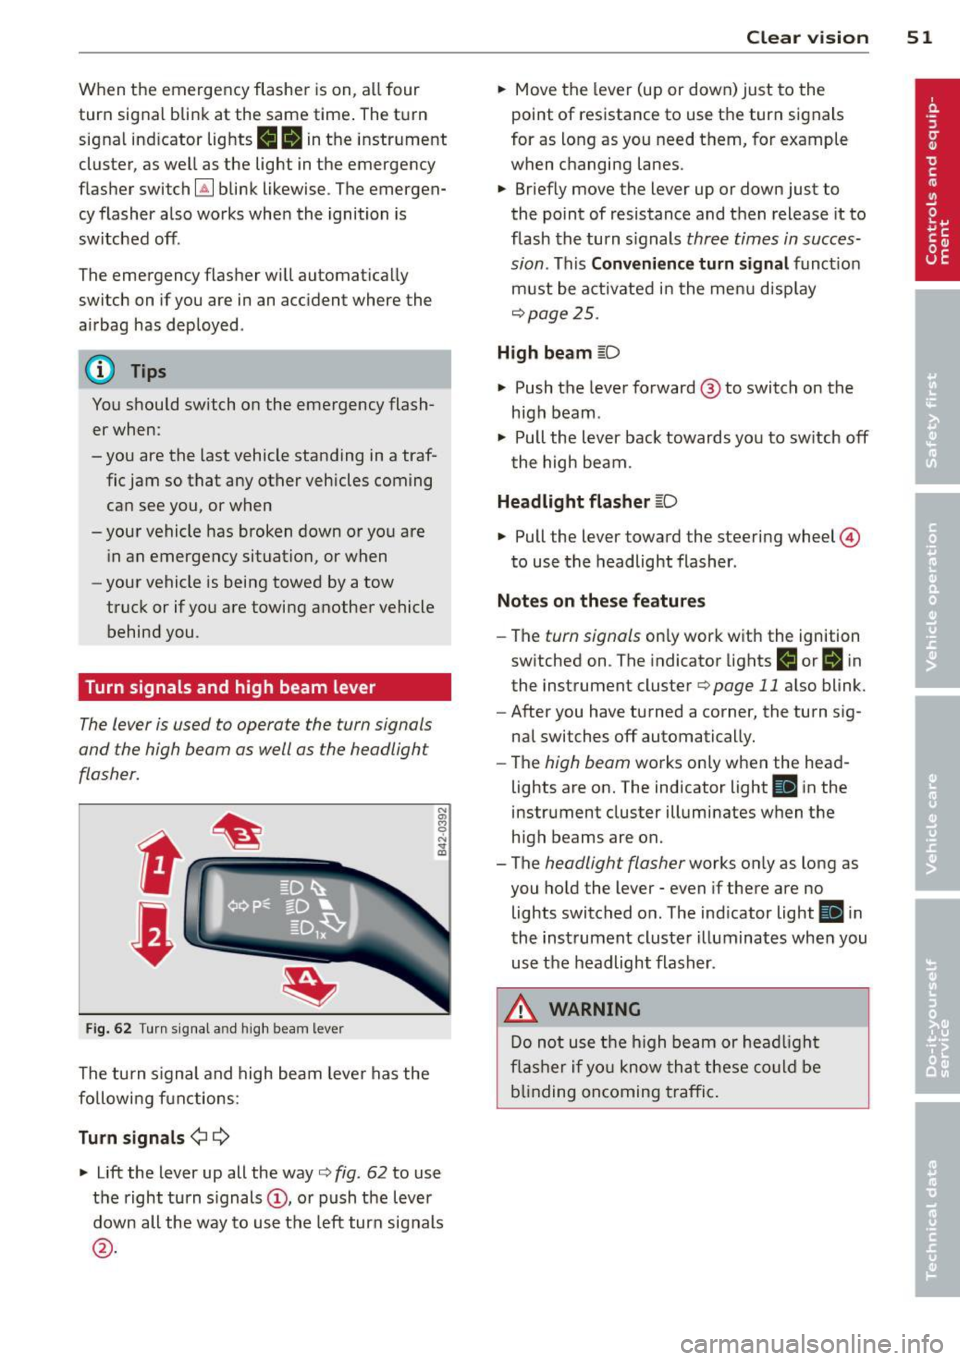 AUDI R8 SPYDER 2012  Owners Manual When  the  emergency flasher  is on, all  four 
turn  signal  blink  at the  same time . The turn 
signal  ind icator  lights 
R  II in the  instrument 
cluster,  as well  as the  light  in the  emerg